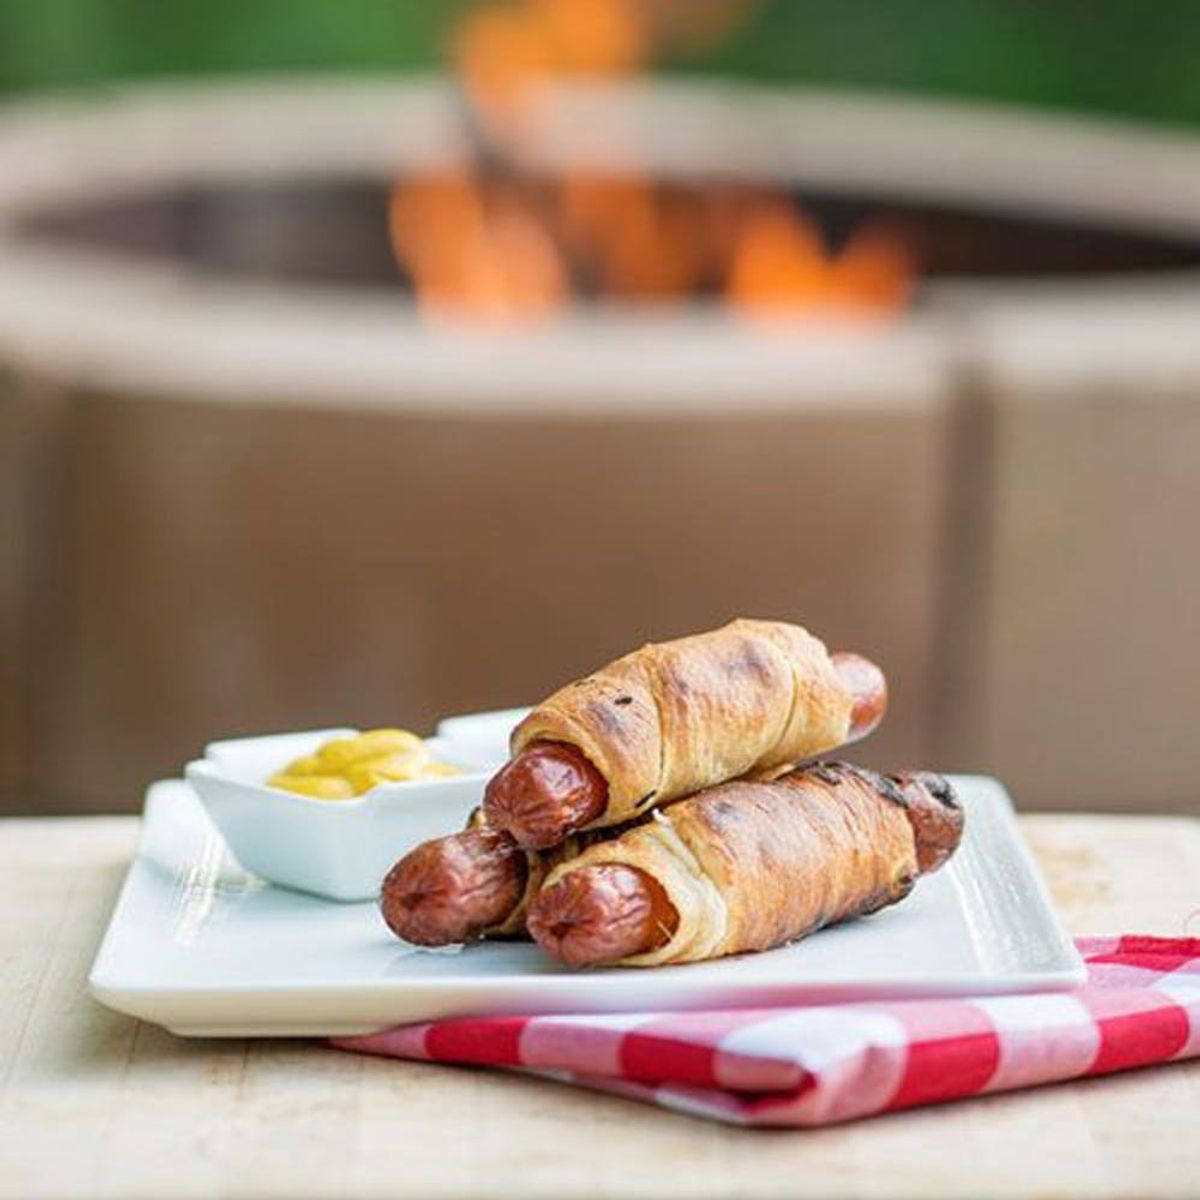 12 Fire Pit Recipes for Your Summertime Backyard Soiree